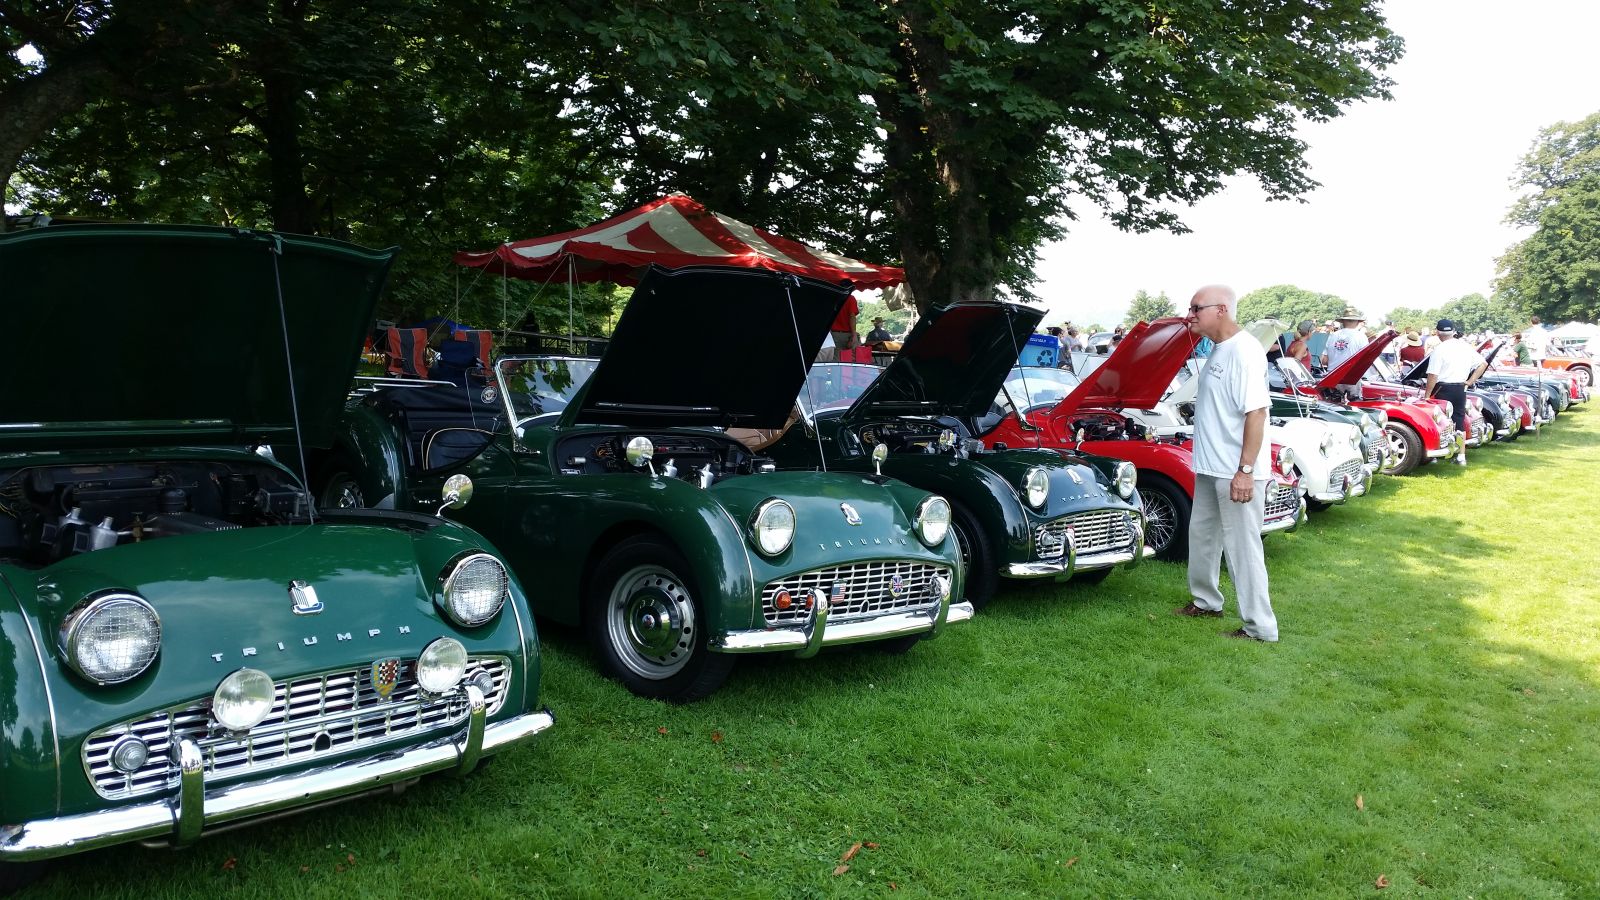 There is always an incredible number of old English cars at this show